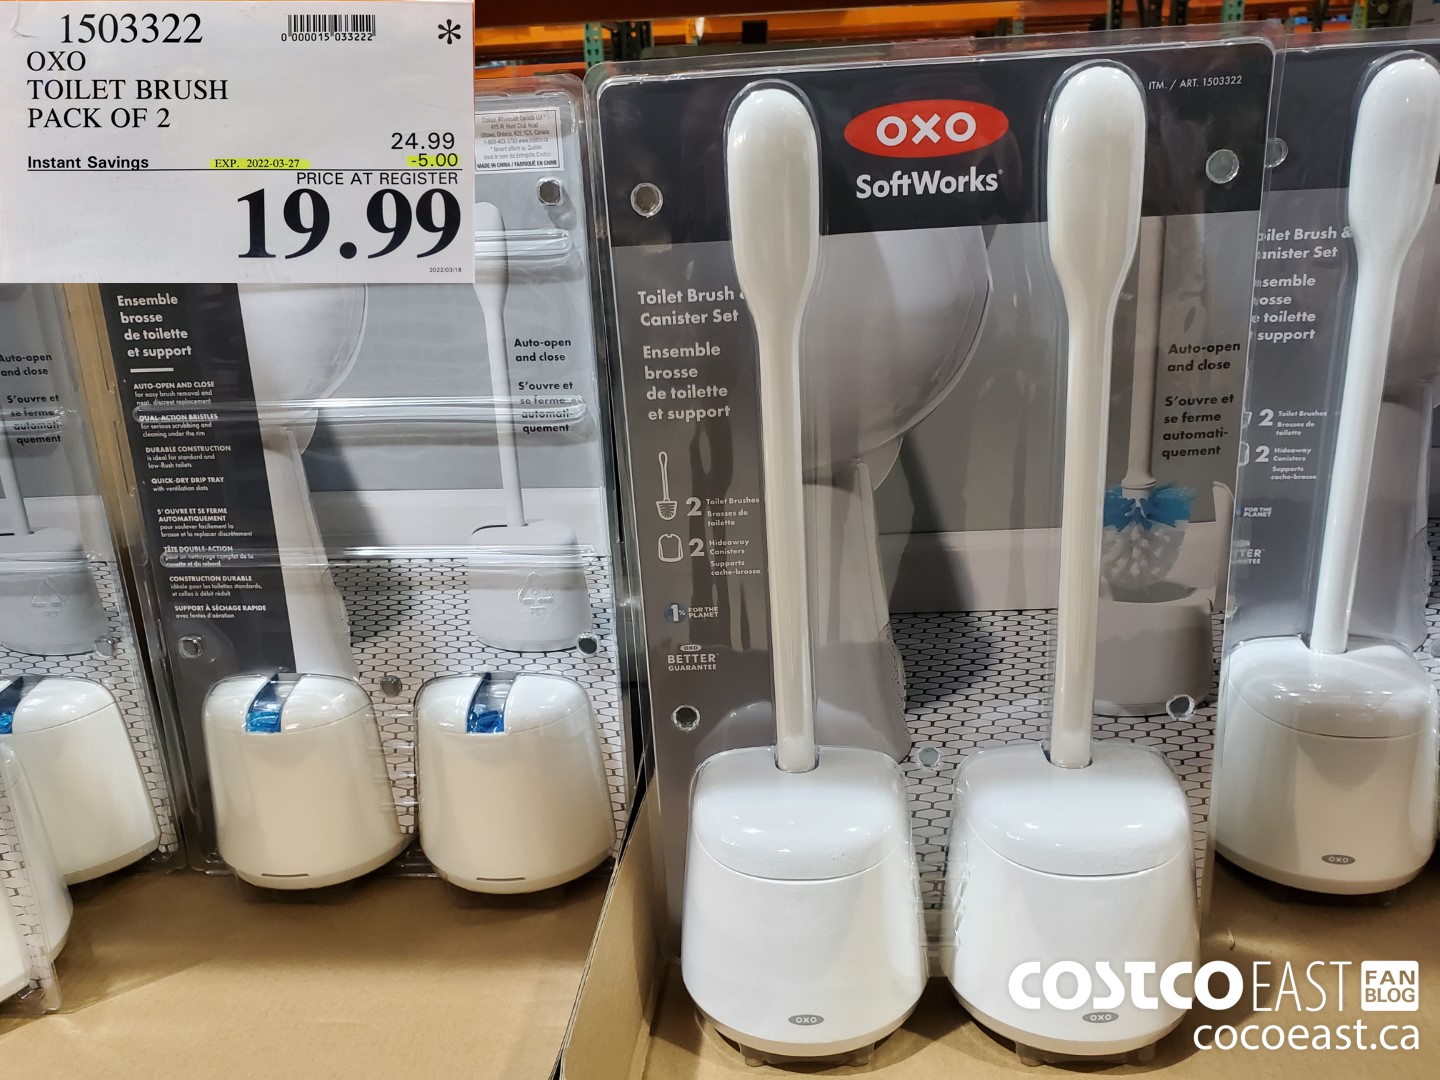 2,733 Likes, 42 Comments - COSTCO DEALS (@costcodeals) on Instagram: “🚽 @ oxo 2 pack #toiletbrush and canister set is righ…